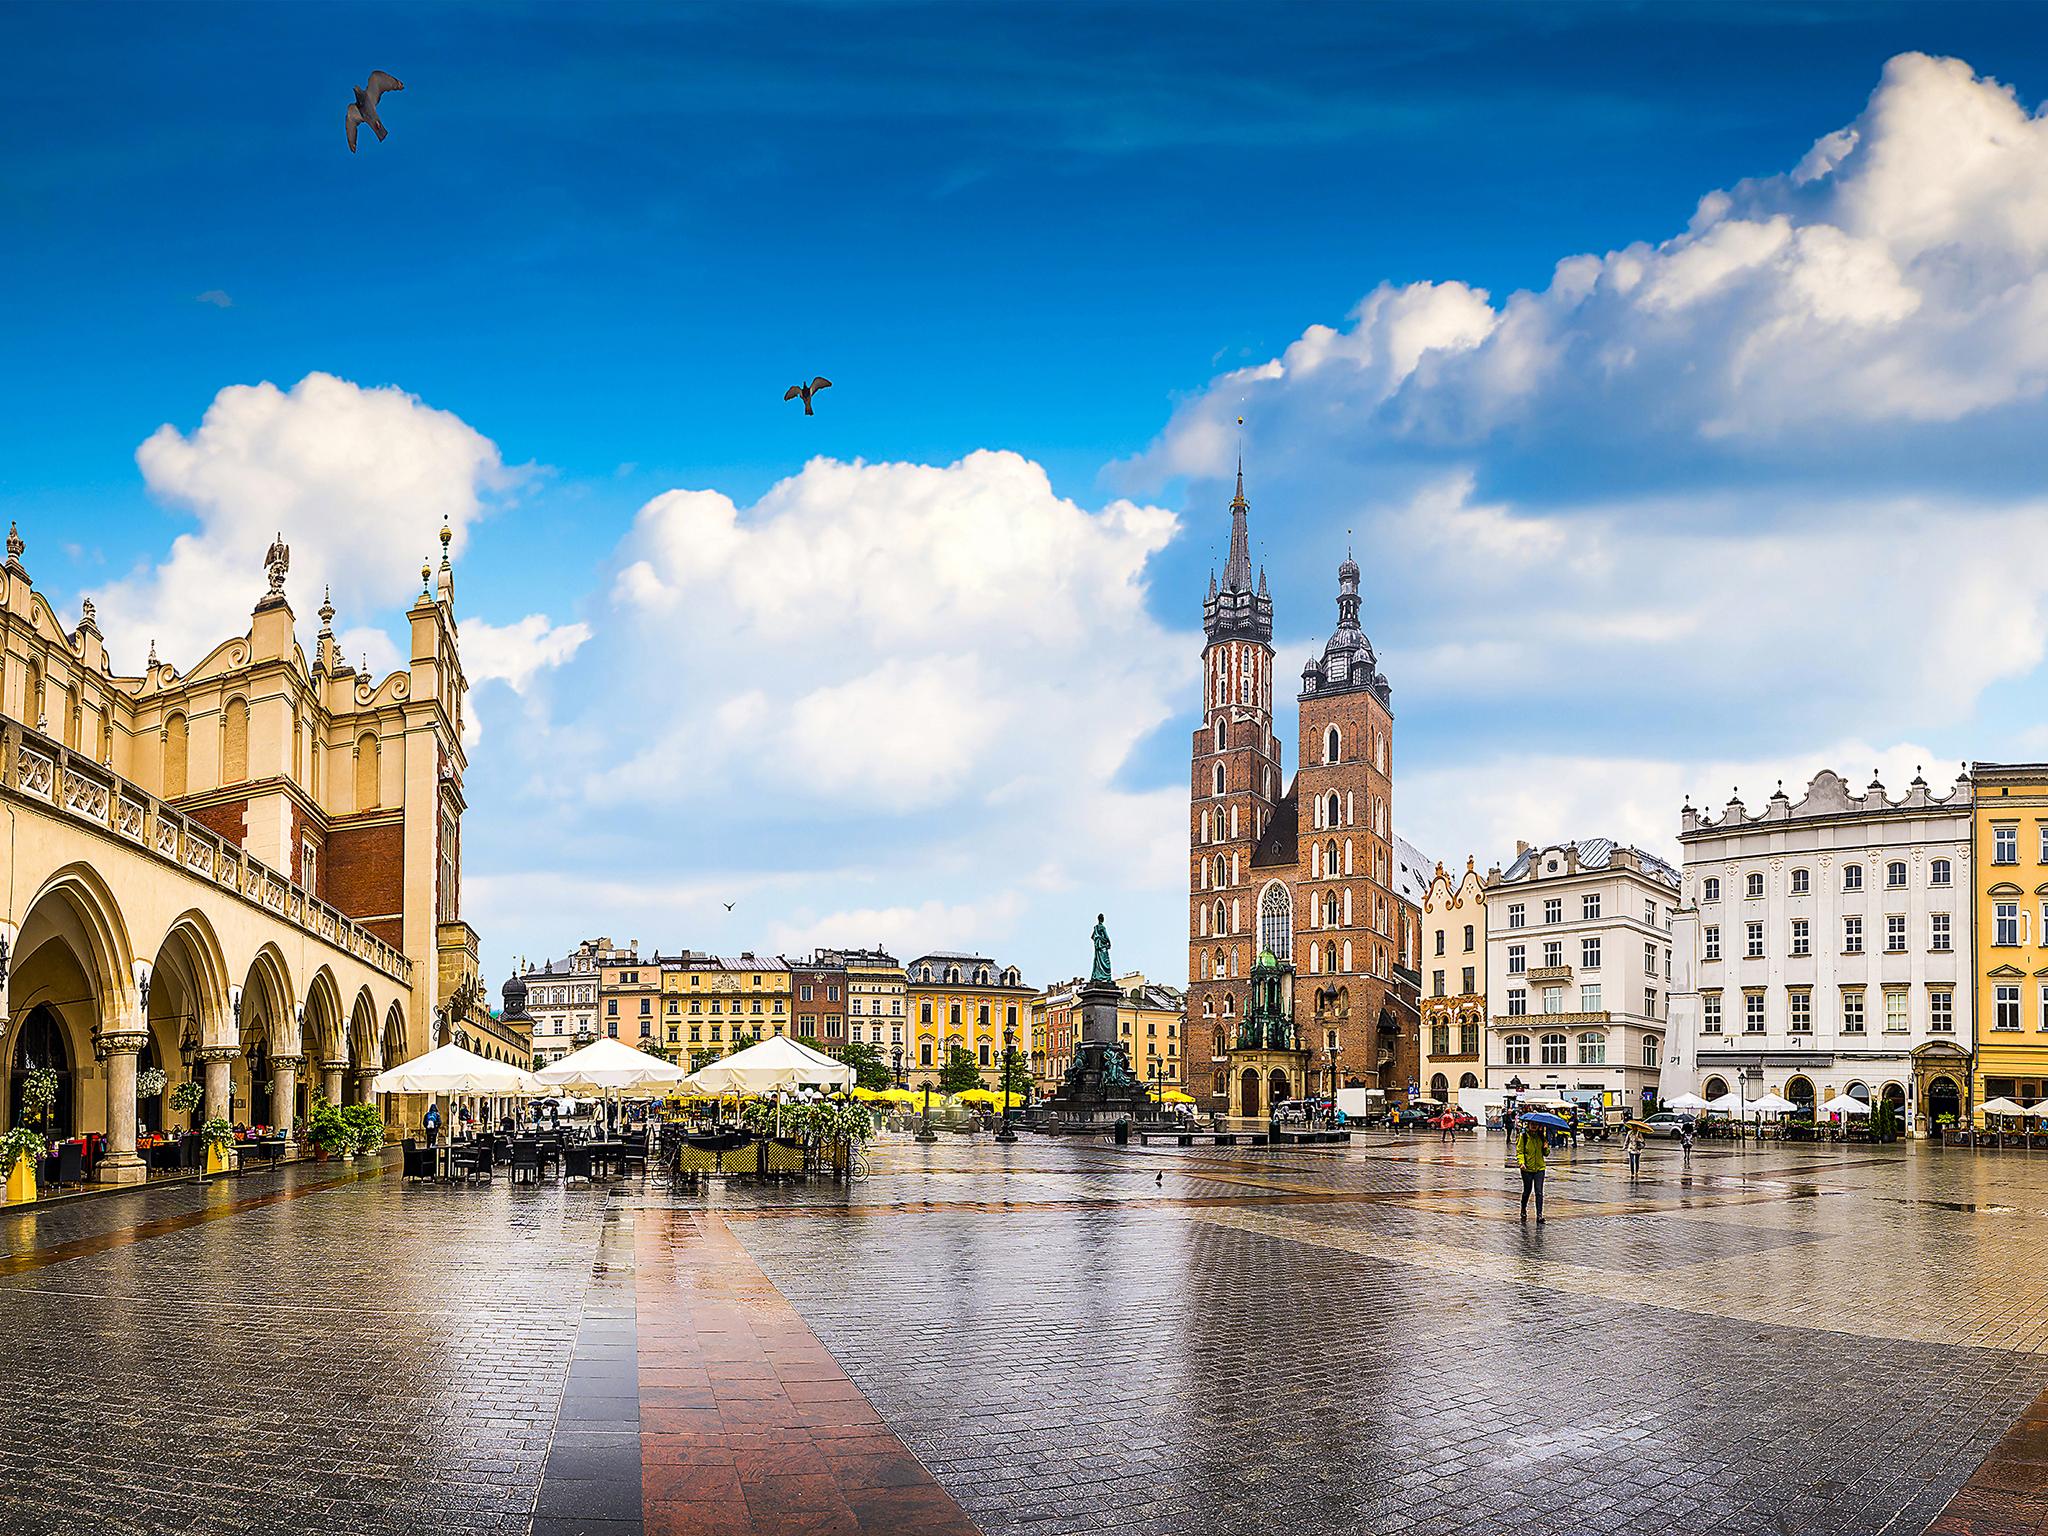 Krakow has been ranked the cheapest European city break by Which? Travel